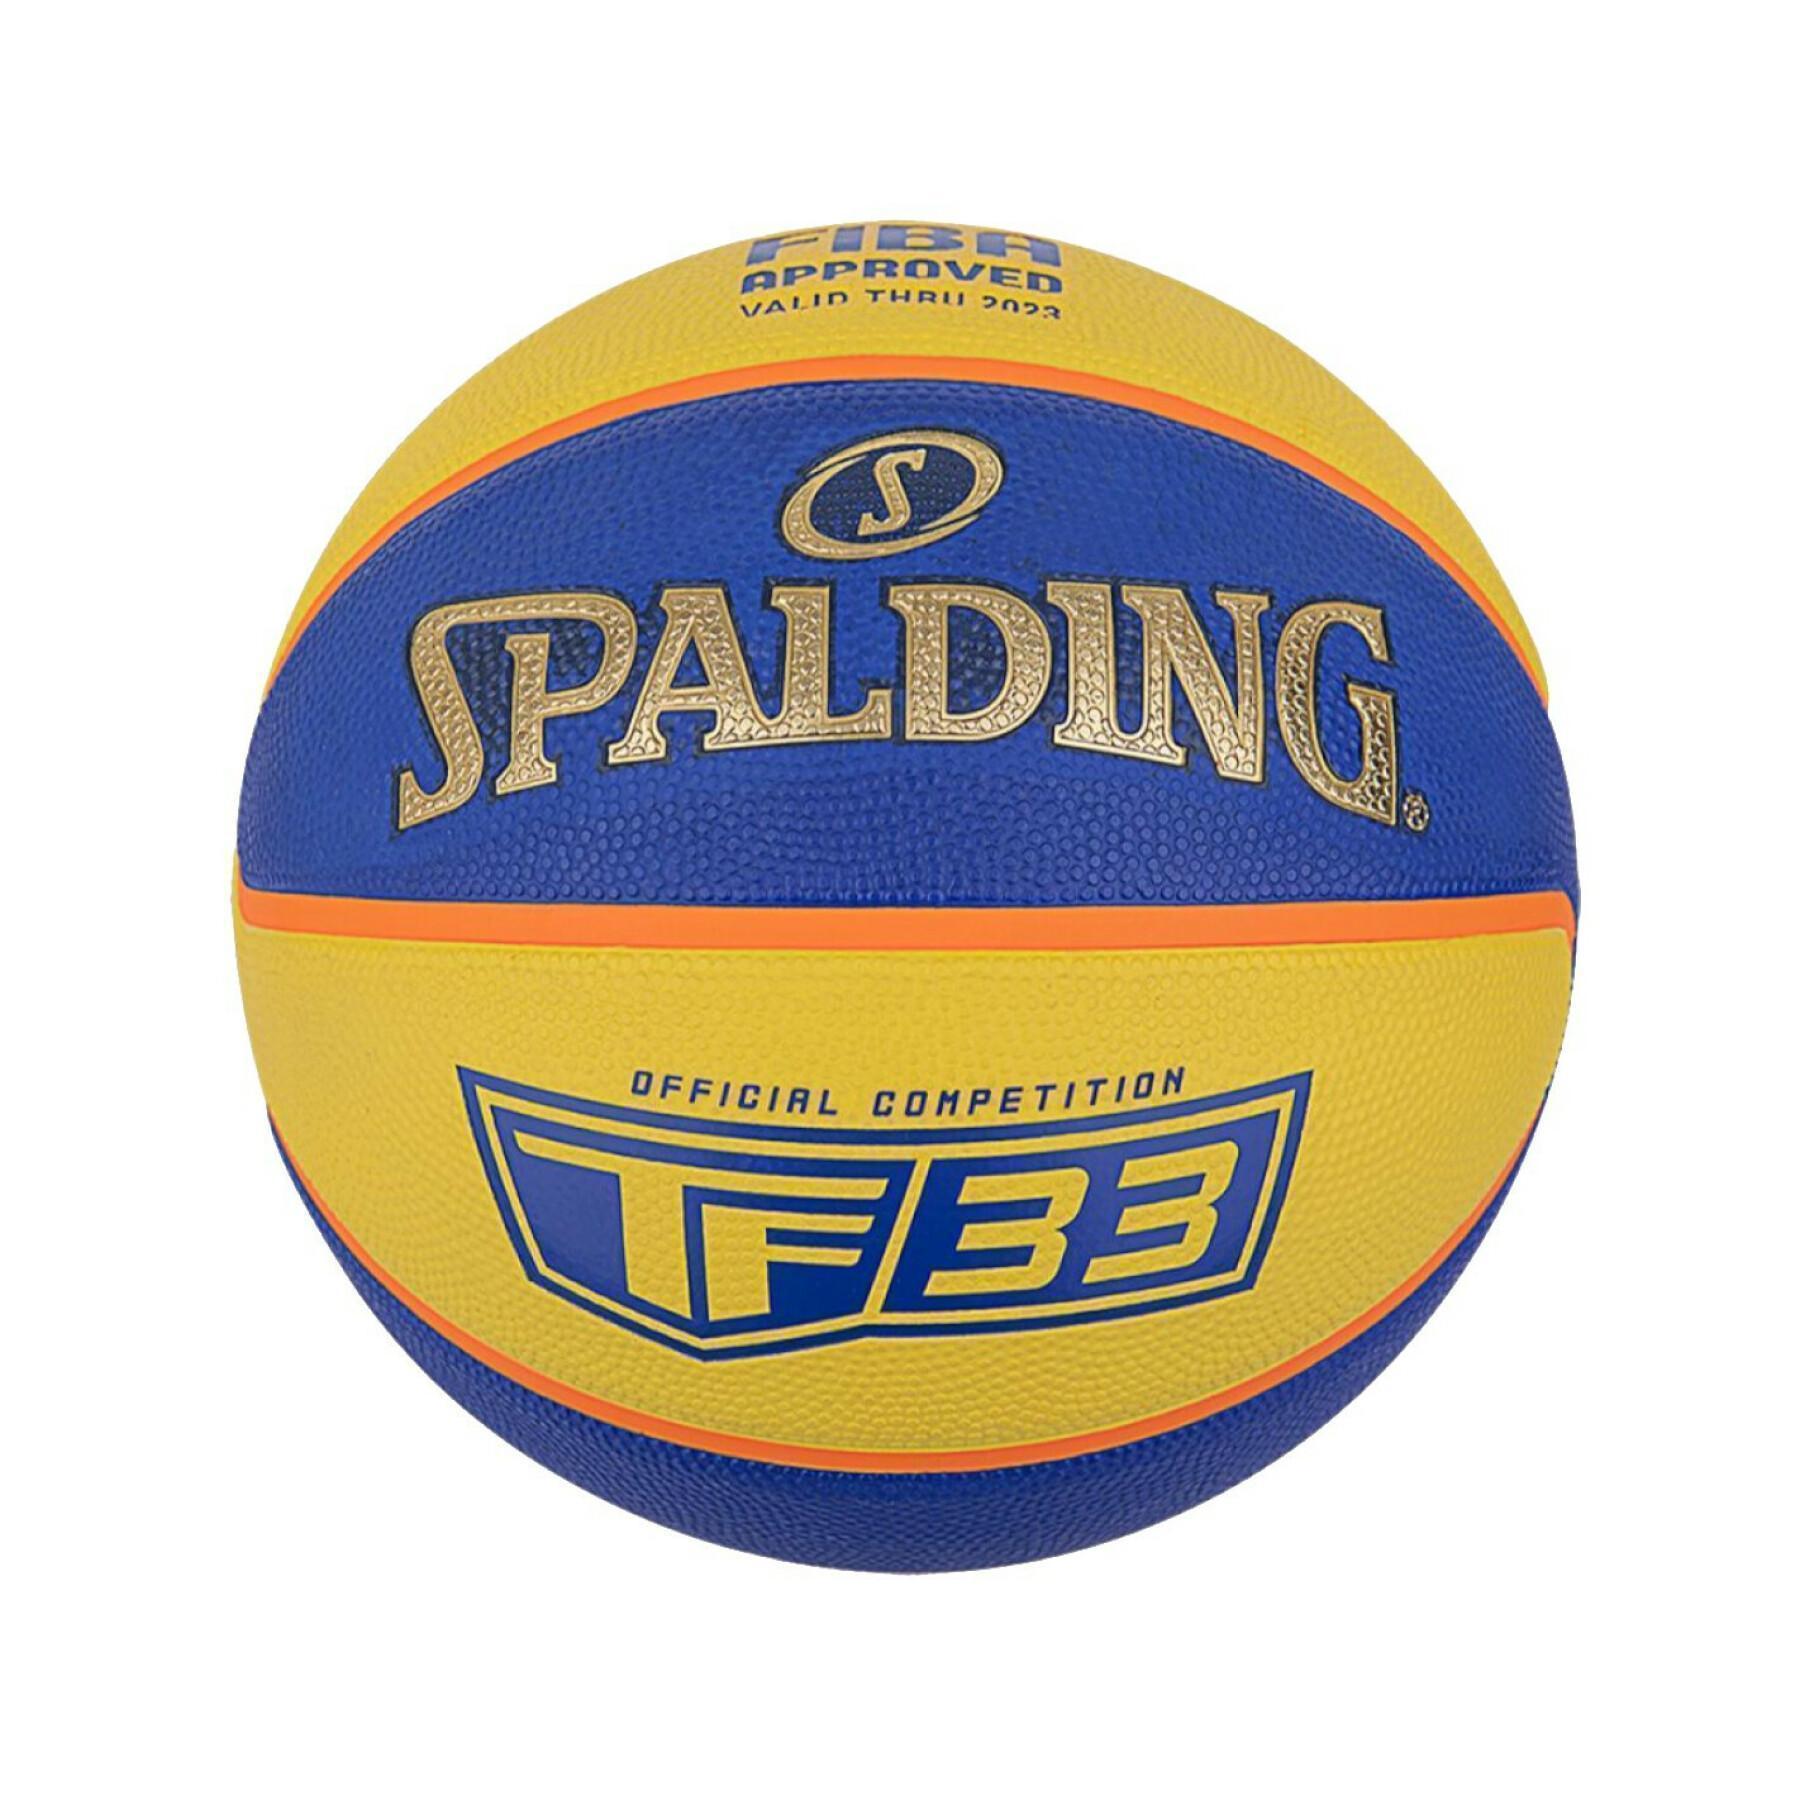 Basketball Spalding TF-33 Gold Rubber